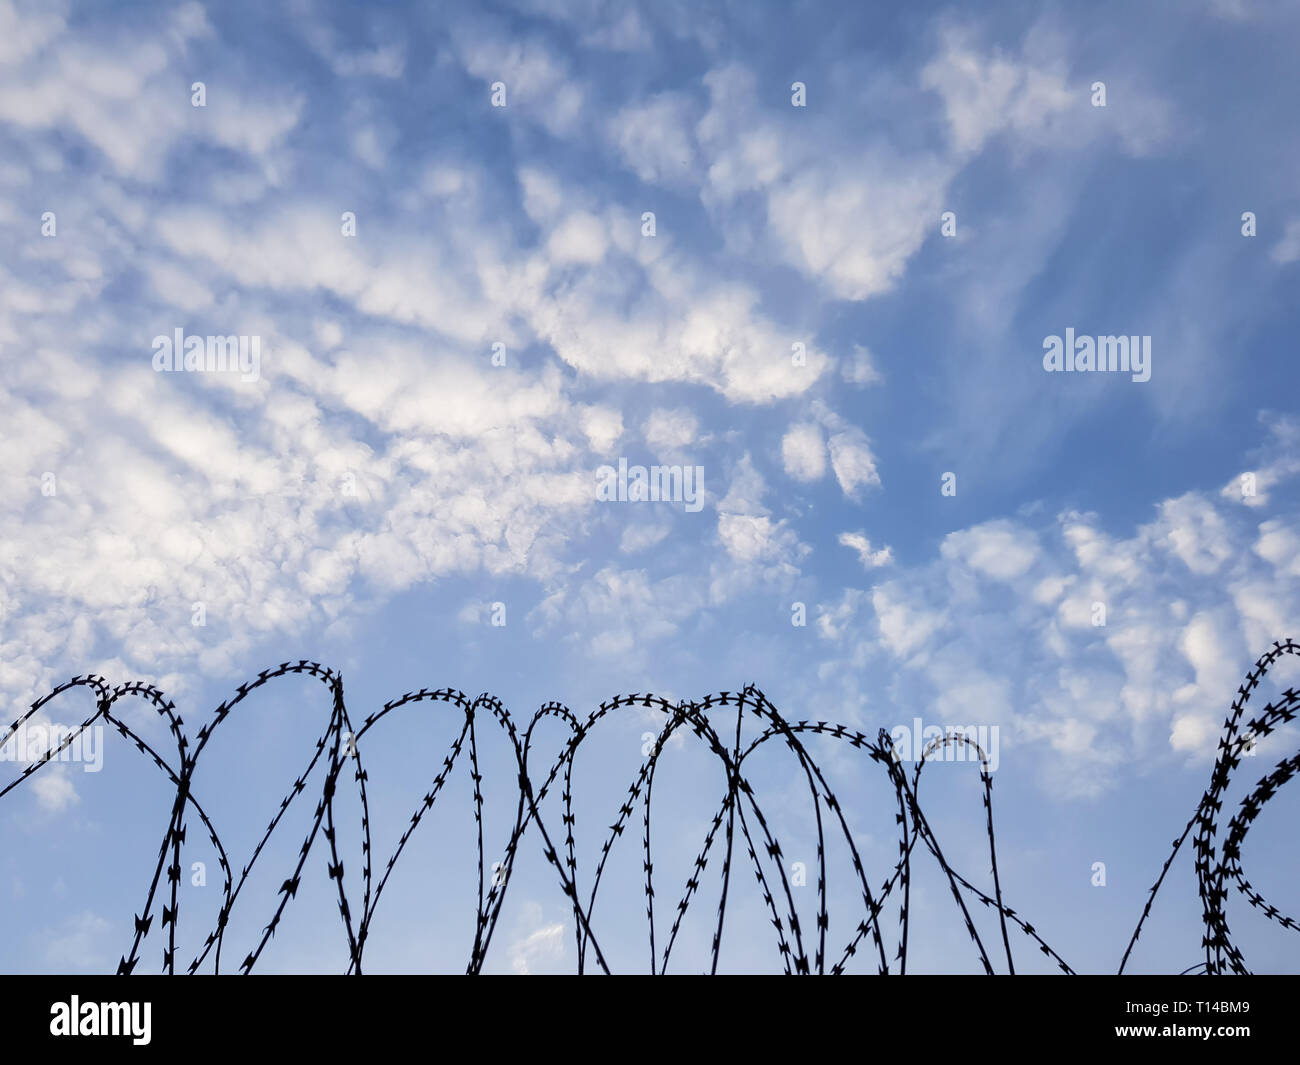 Razor wire coils on a security fence. High security facility or restricted area. Prison, incarceration or detention concept - border wall. Stock Photo